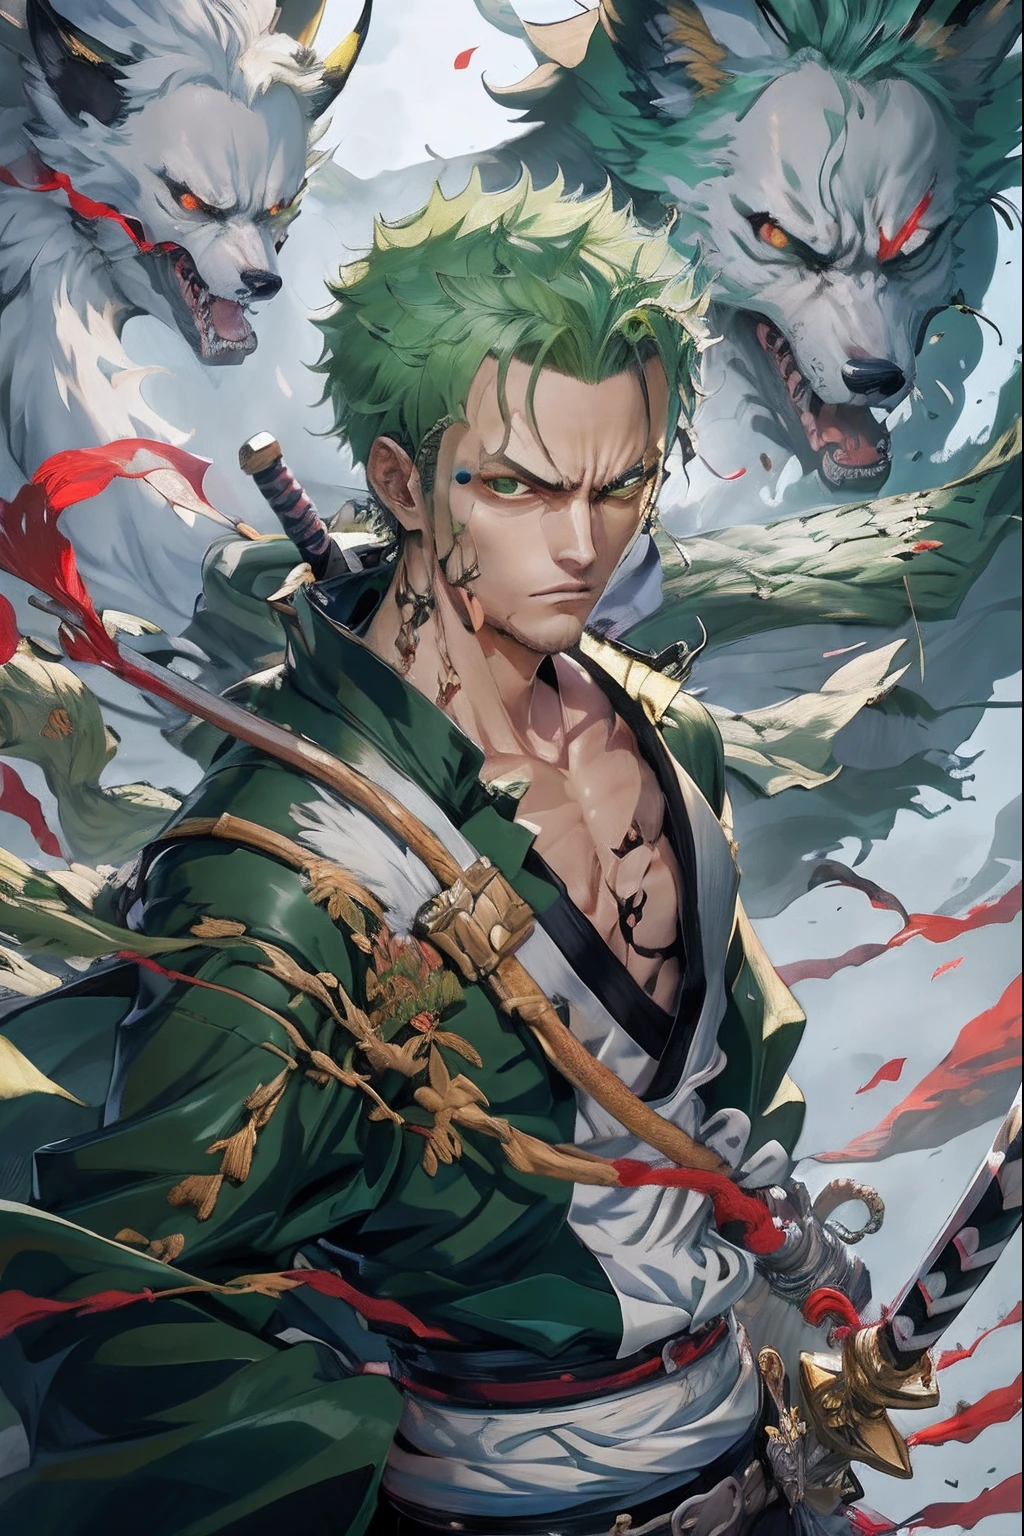 Close up portrait of a green-haired person holding a sword, Roronoa Zoro, 4 k manga wallpaper, badass anime 8 K, from one piece, handsome guy in demon slayer art, one piece artstyle, anime cover, anime wallaper, anime wallpaper 4 k, anime wallpaper 4k, highly detailed exquisite fanart, Detailed key anime art,The background is a flaming wolf、anime styled